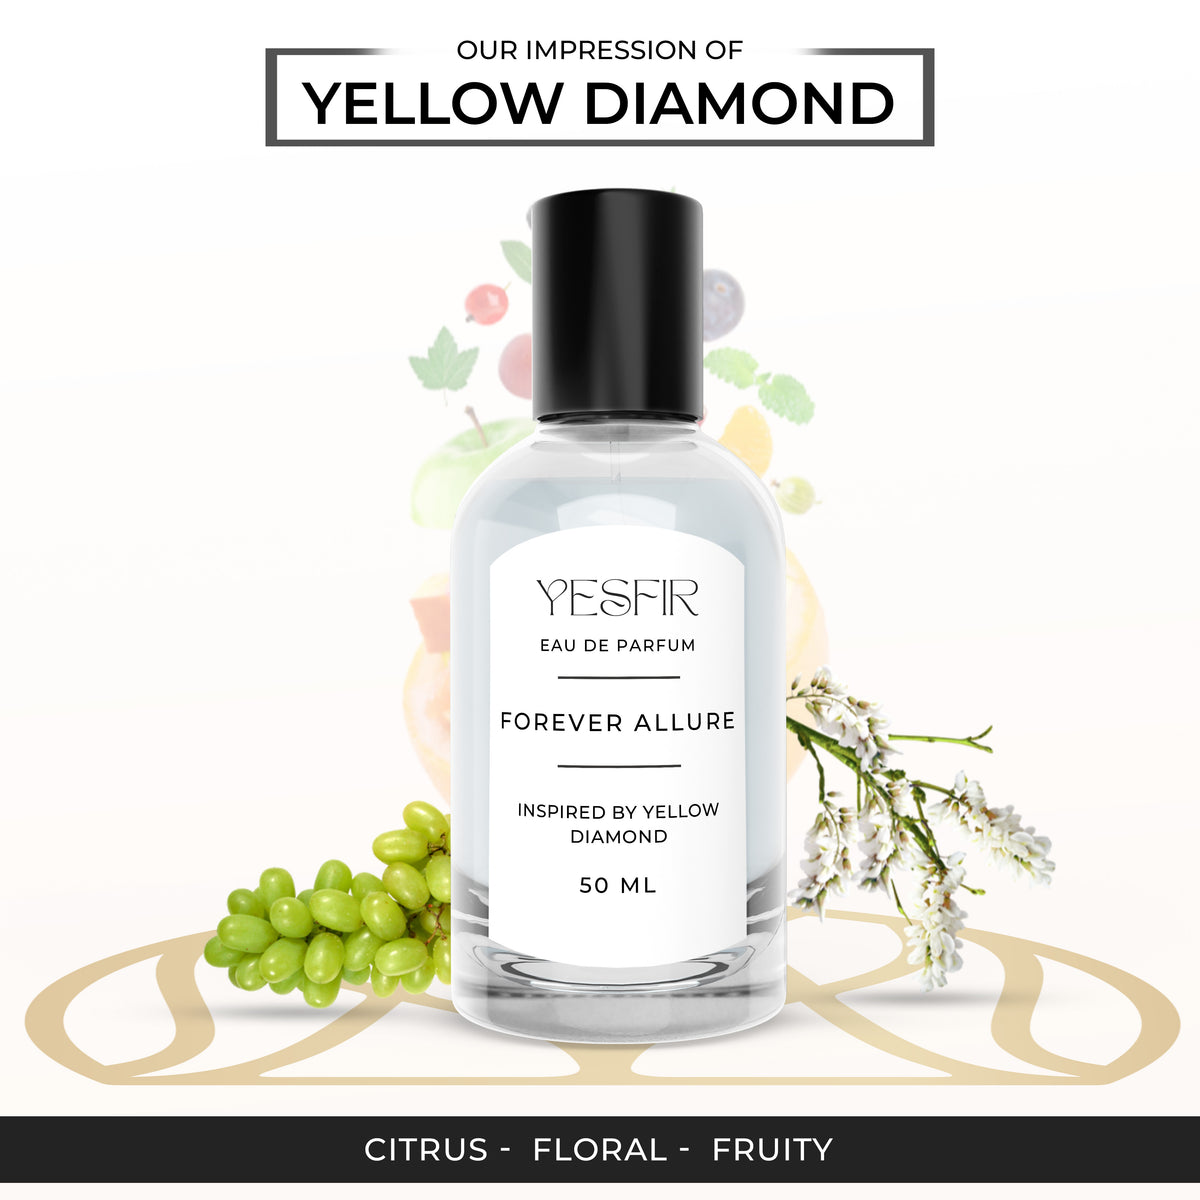 Forever Allure - Inspired by Yellow Diamond